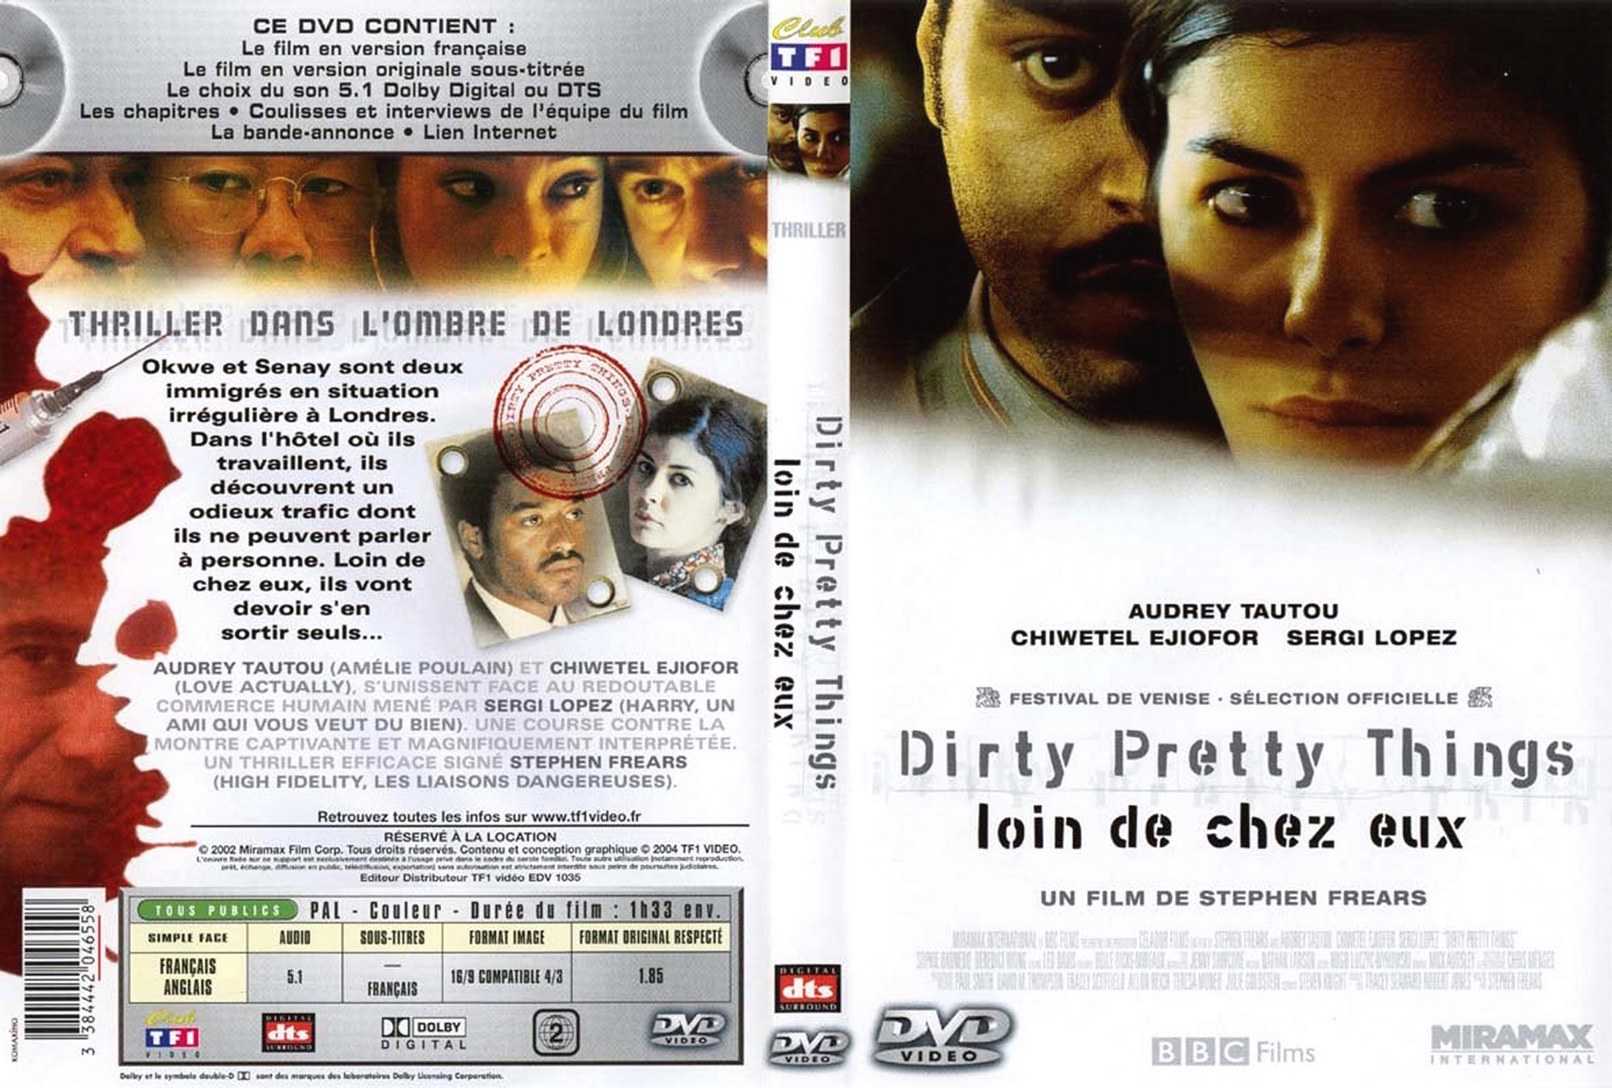 Jaquette DVD Dirty pretty thing